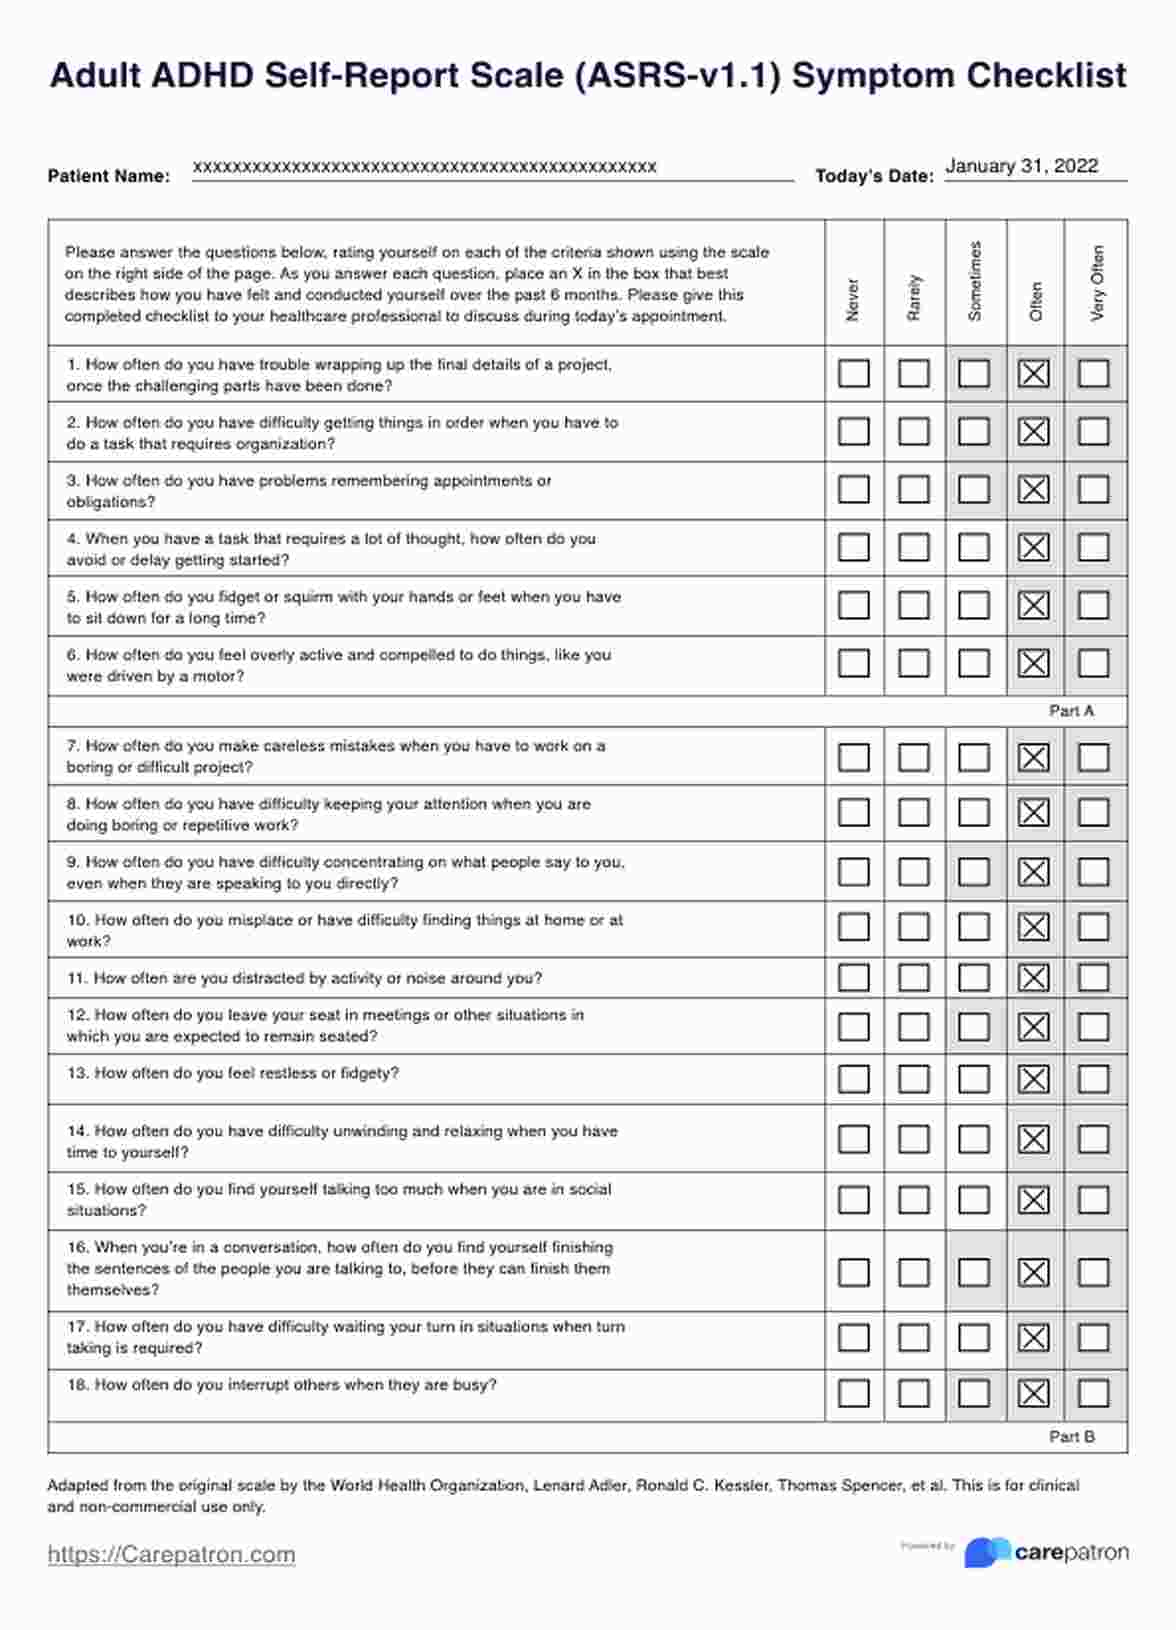 Adult ADHD Self-Report Scale PDF Example